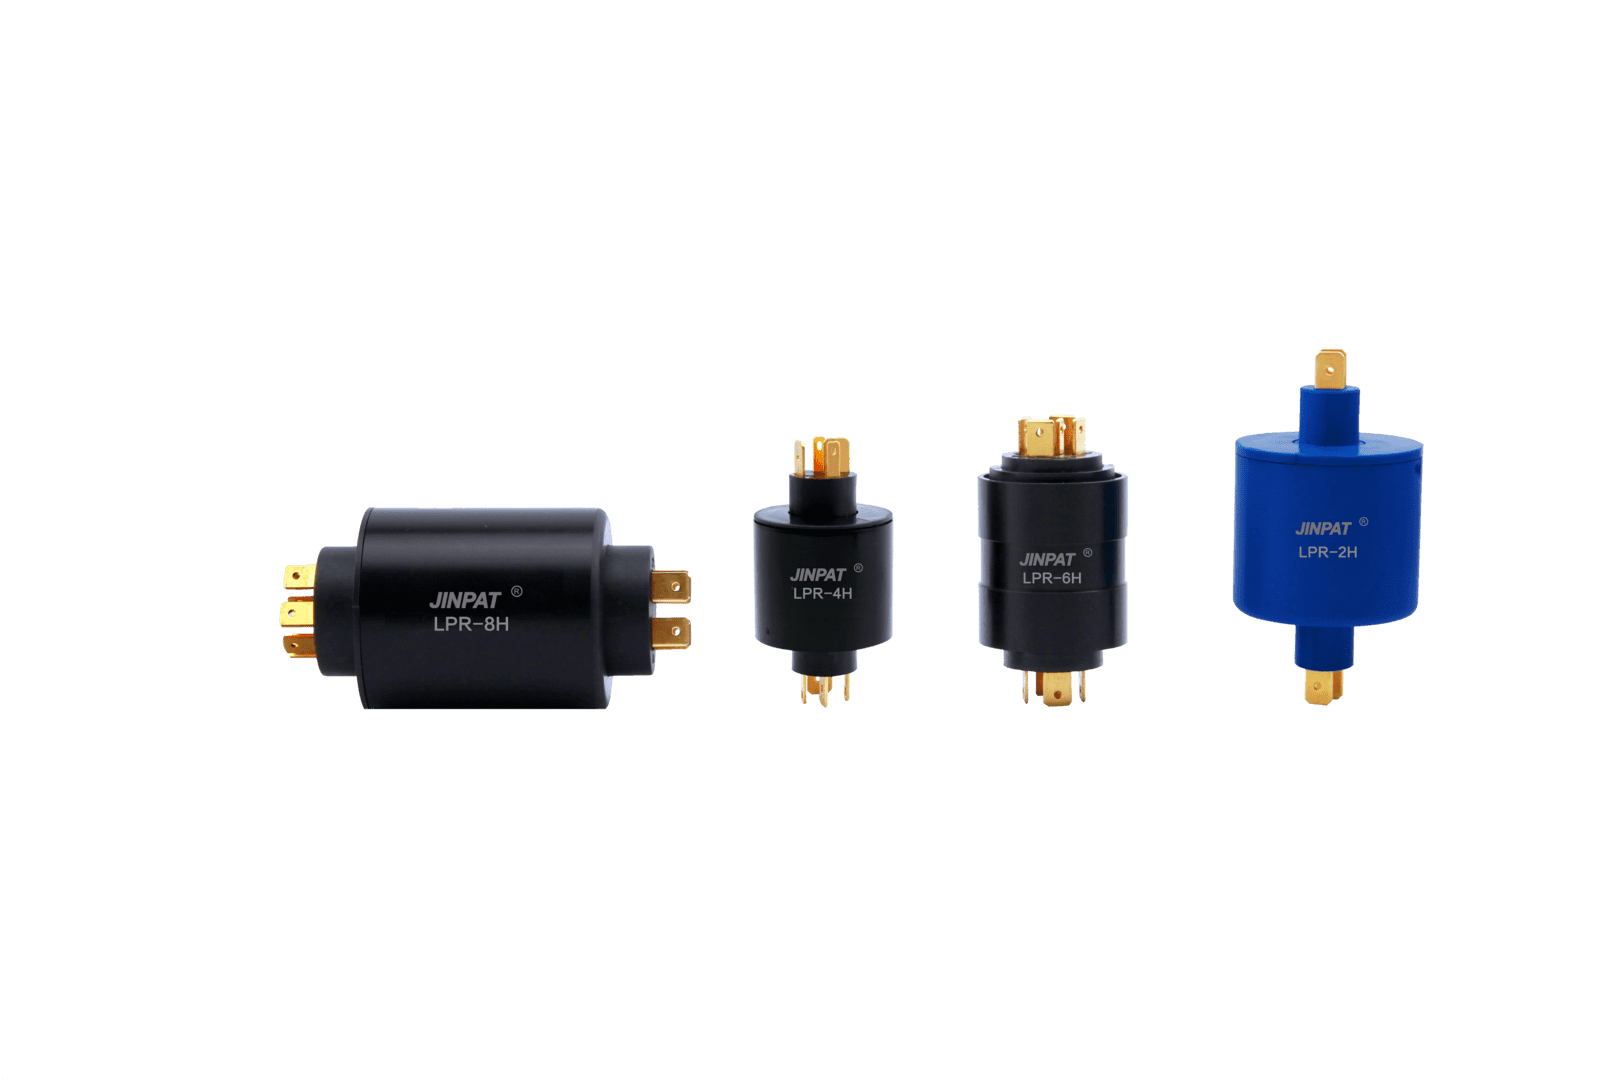 Pin Connection Slip Rings